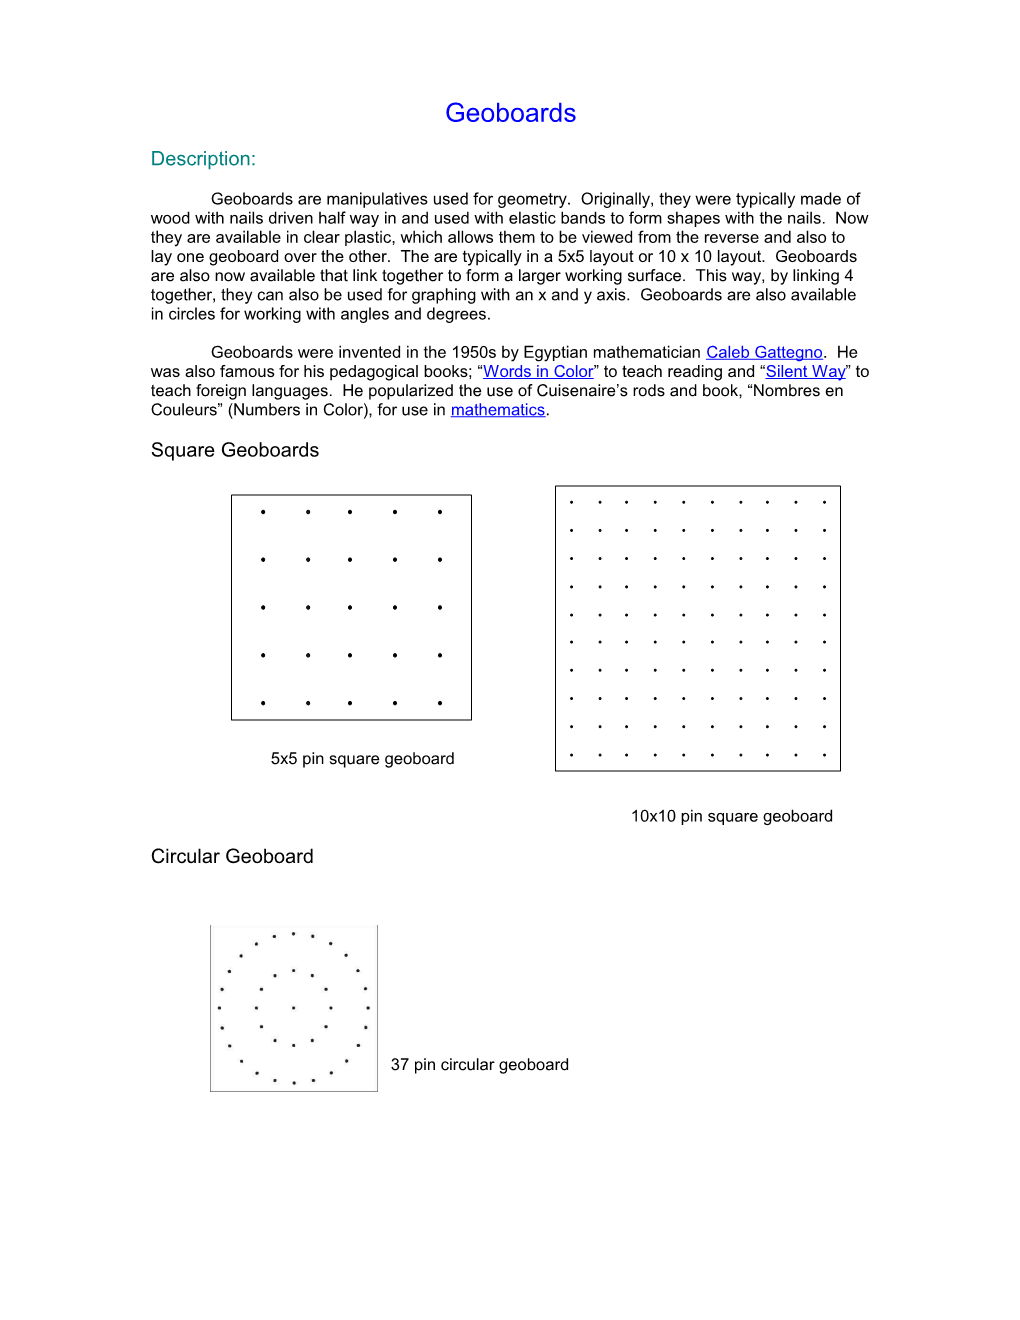 Geoboards Are Manipulatives Used for Geometry. Originally, They Were Typically Made Of